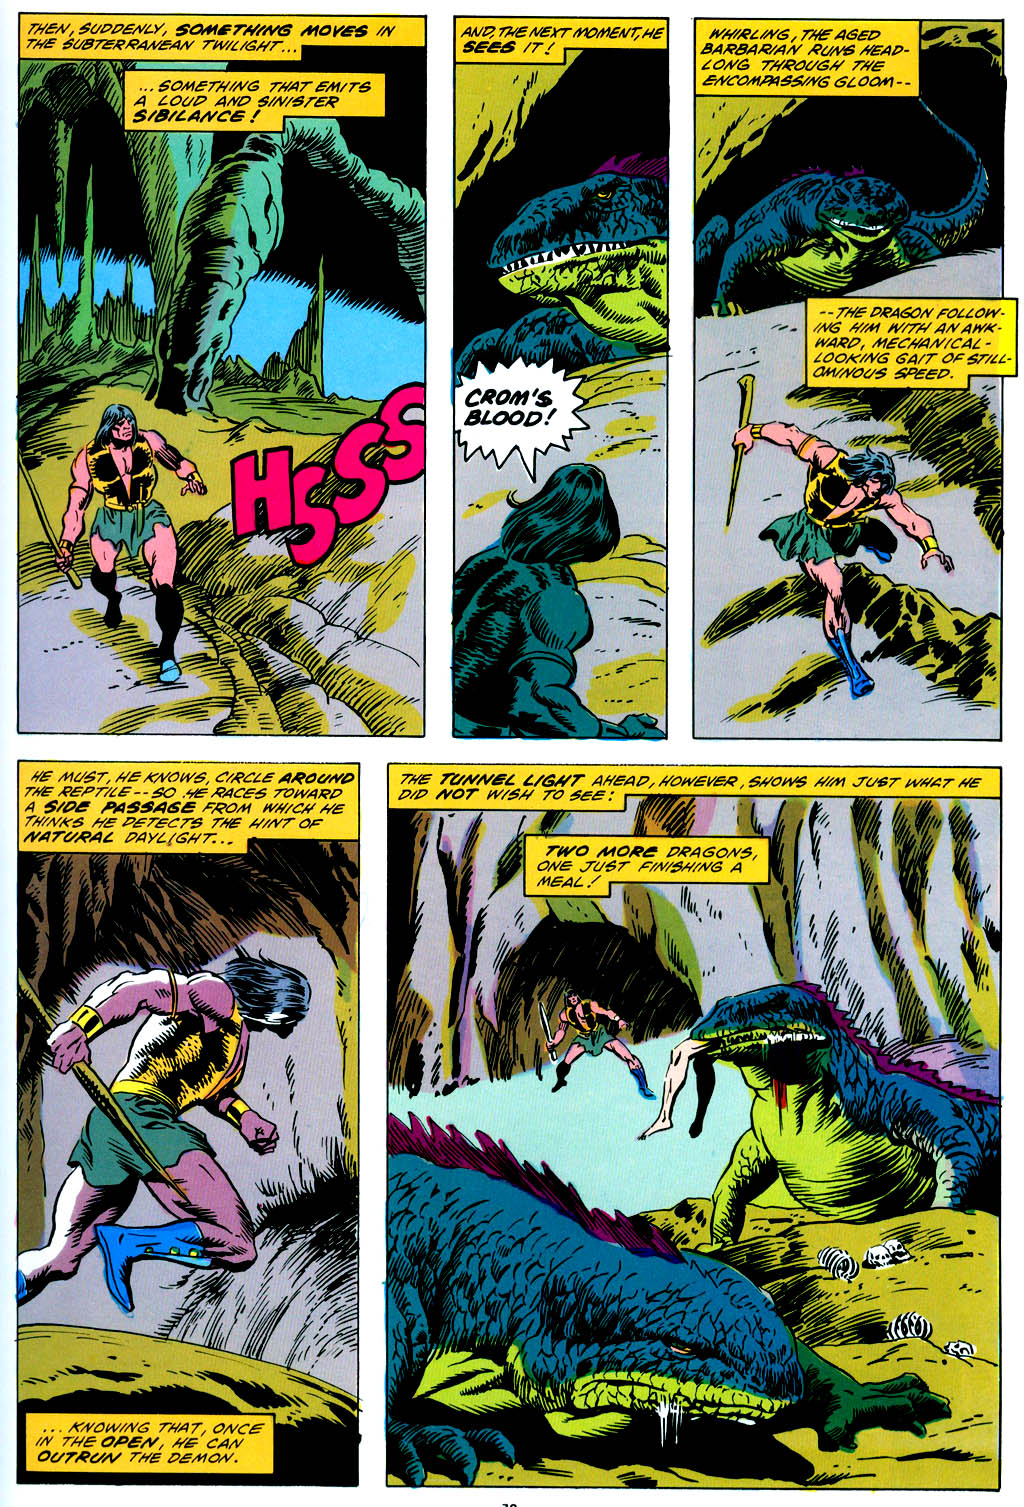 Read online Marvel Graphic Novel comic -  Issue #42 - Conan of the Isles - 80